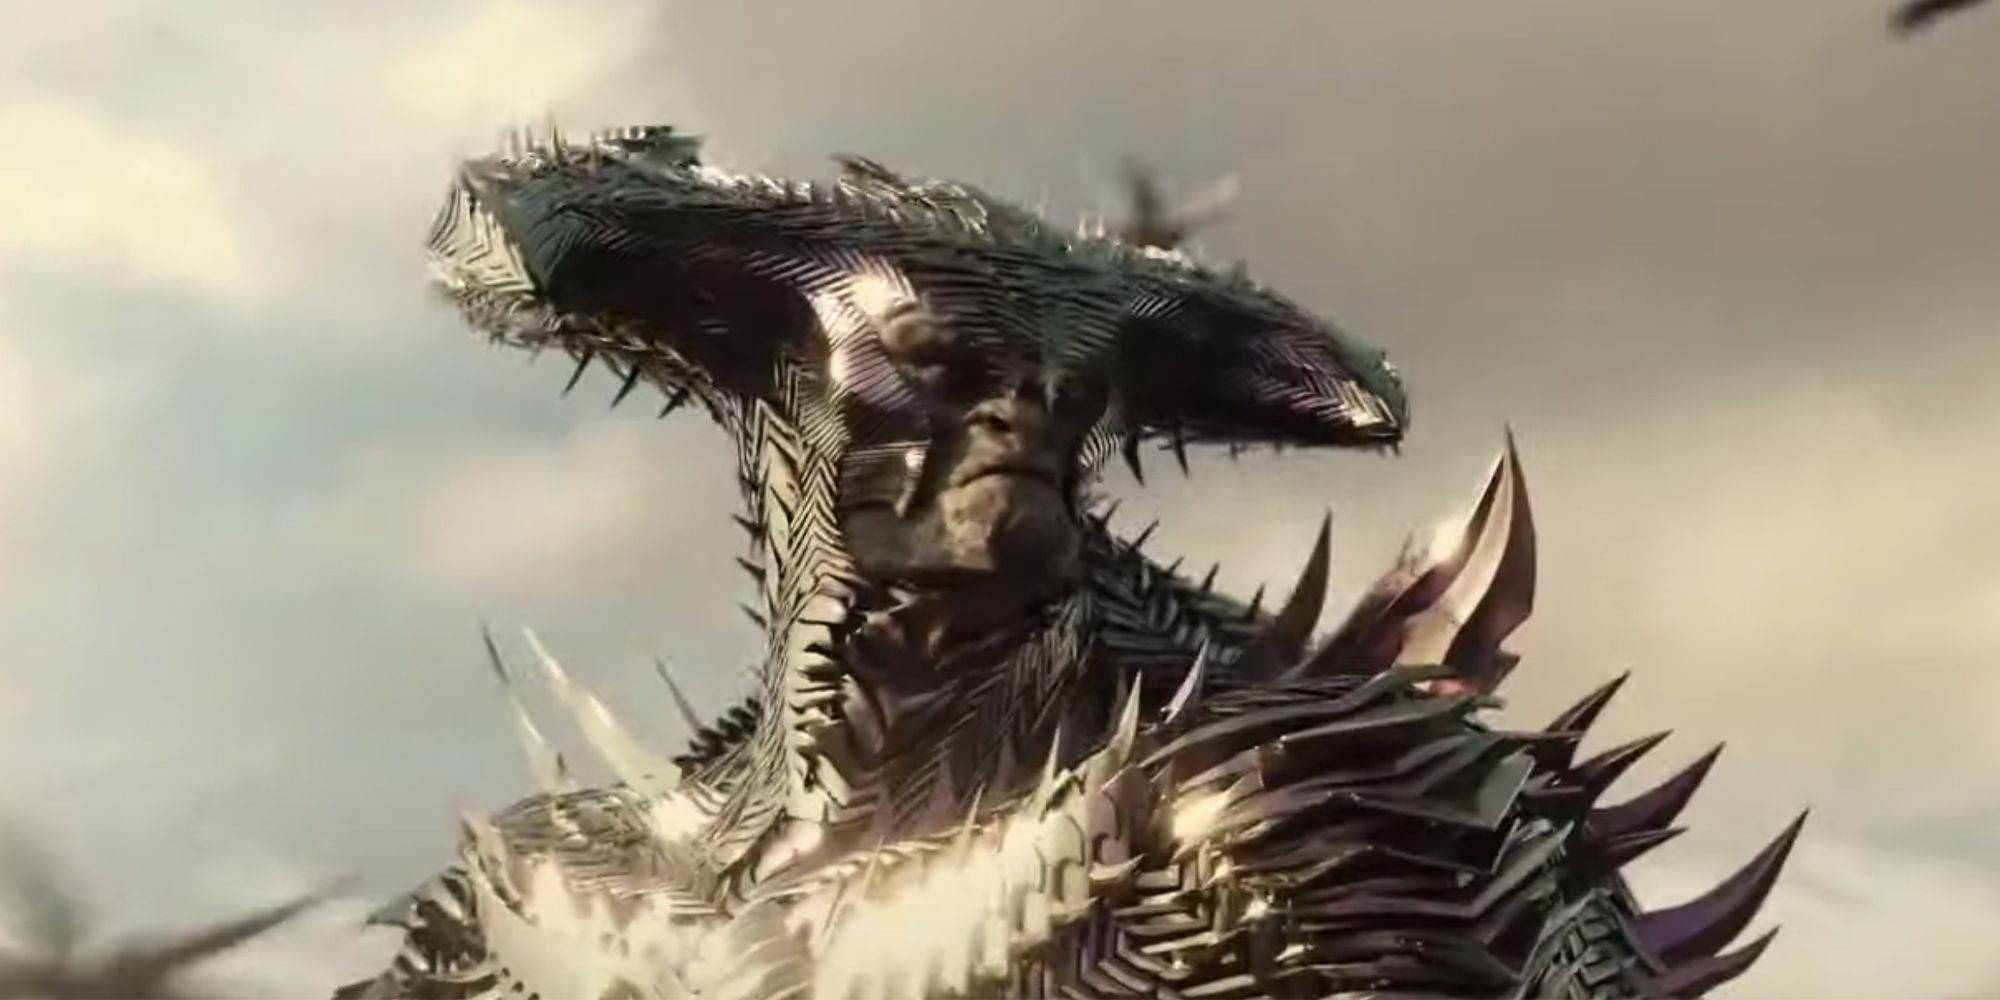 Steppenwolf in Justice League Snyder Cut